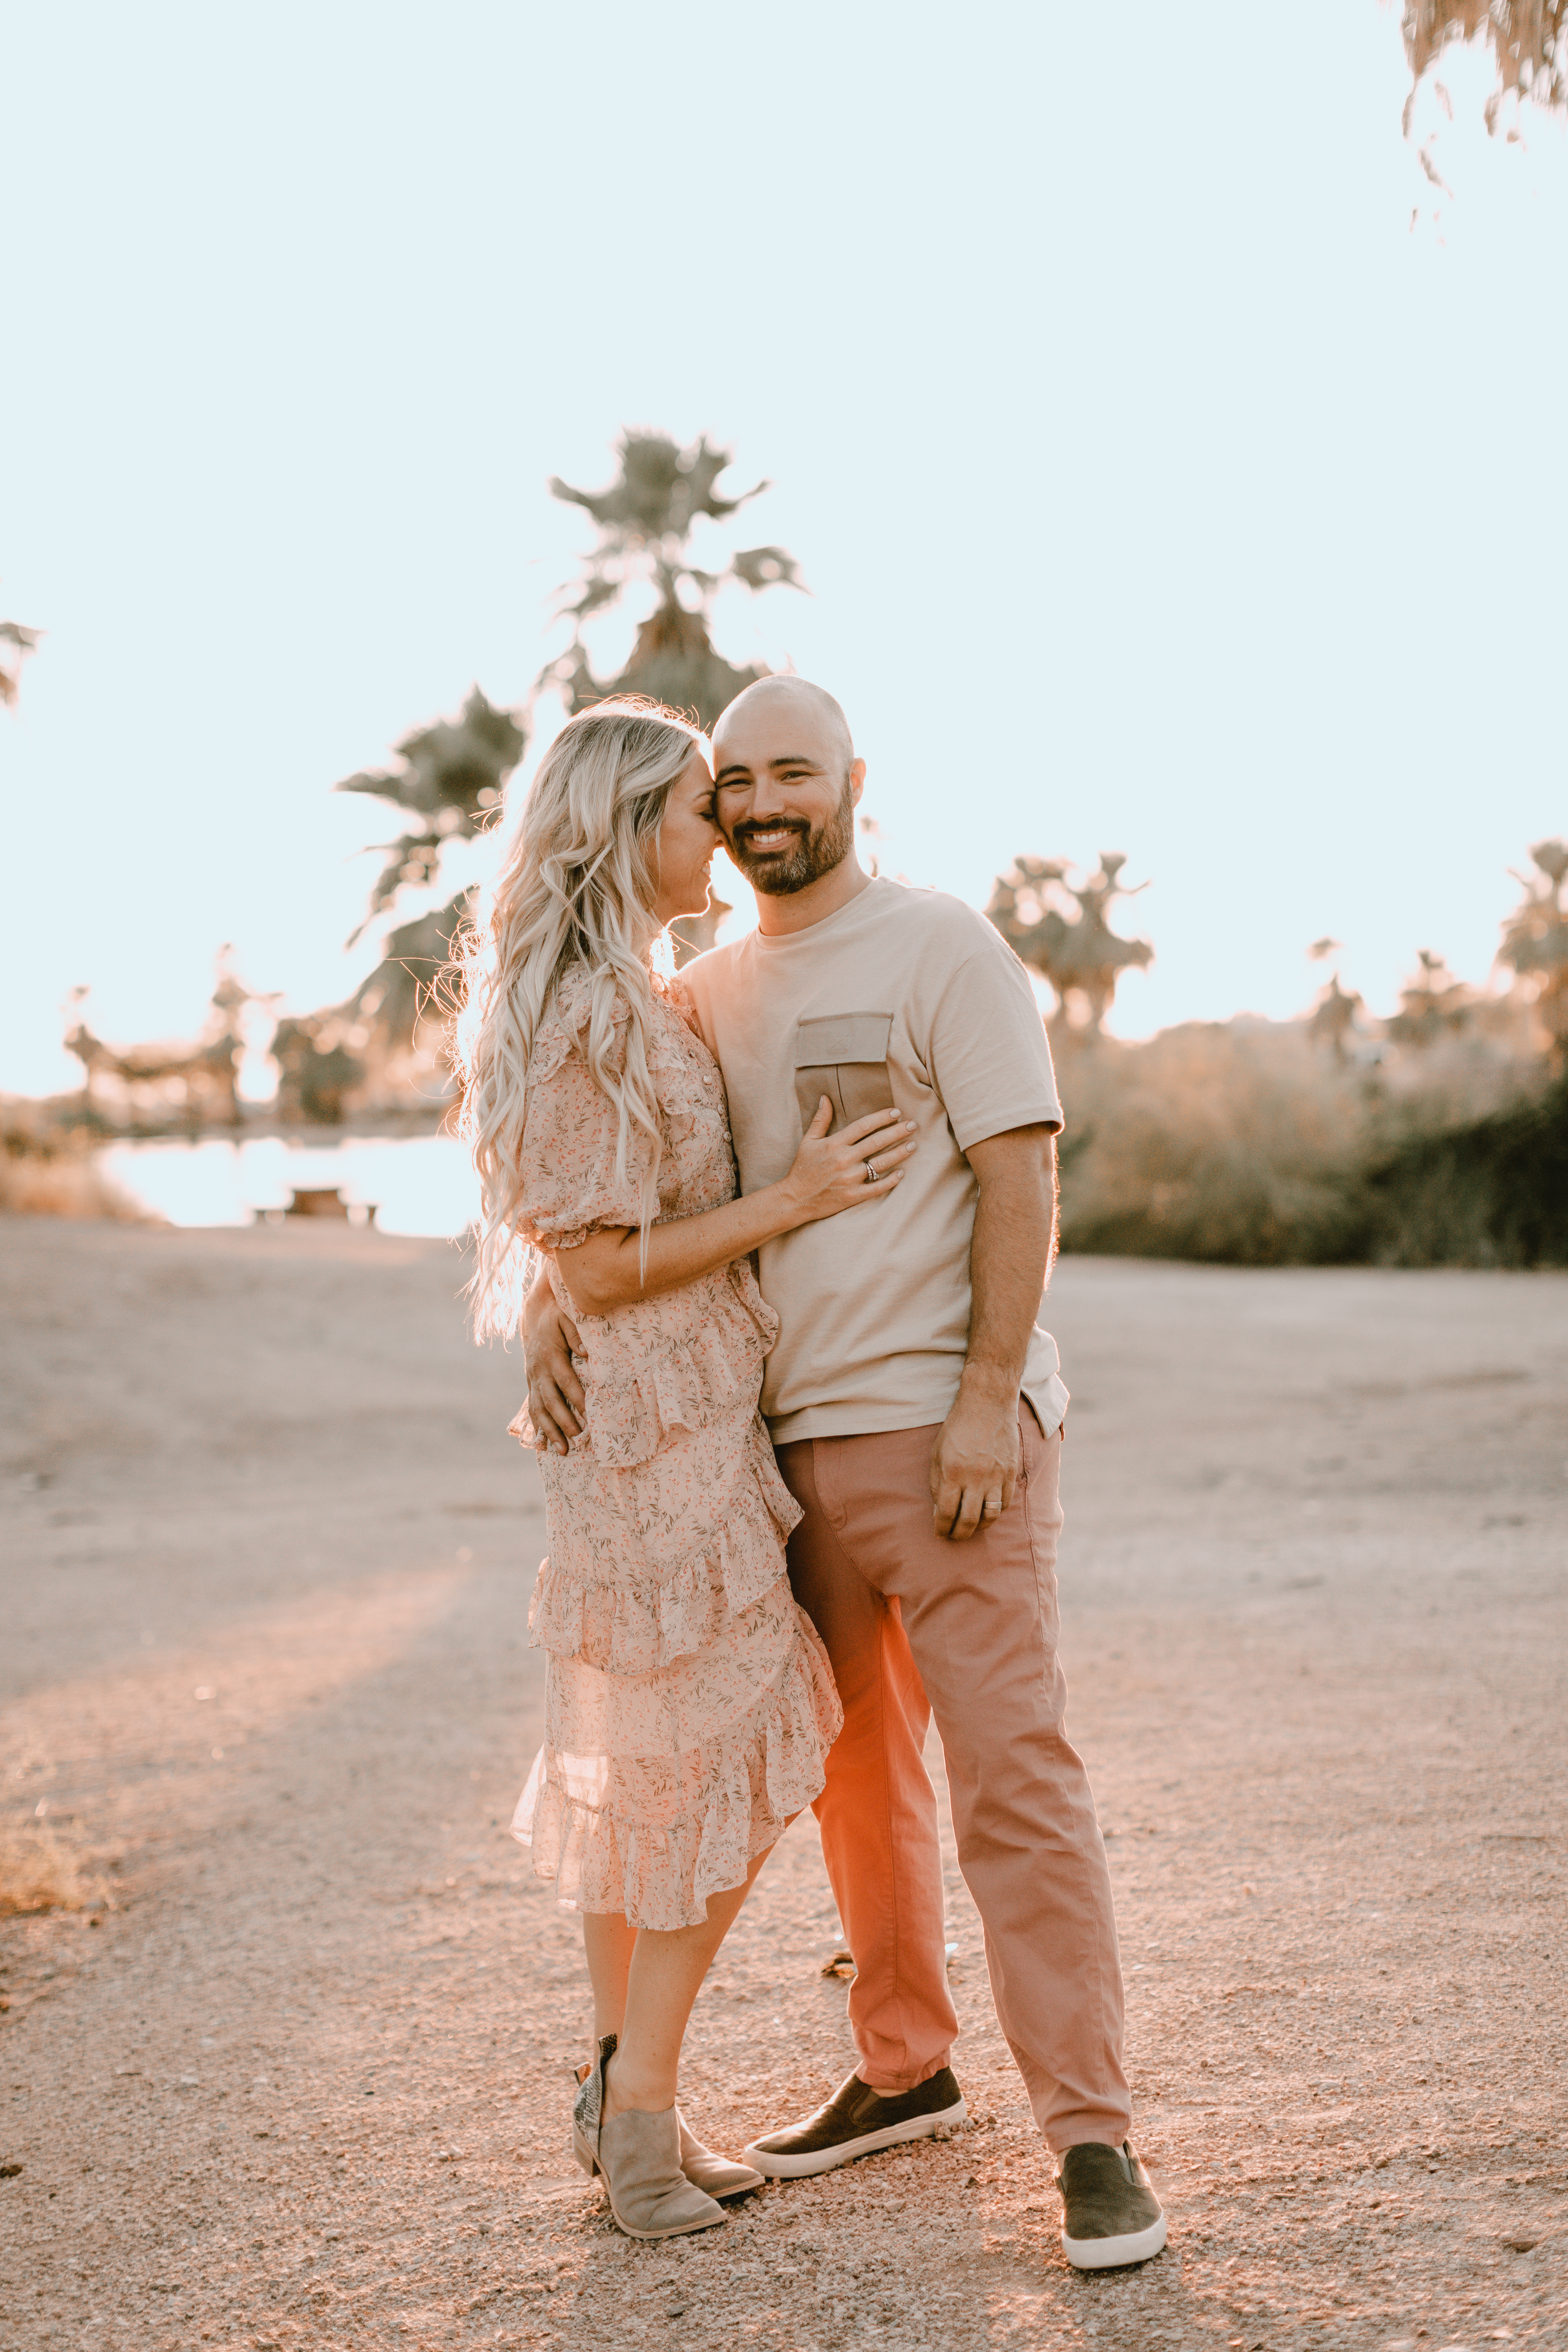 a couple in love at sunset. #familyphotos #engagementphotos #couplegoals #love #marriage